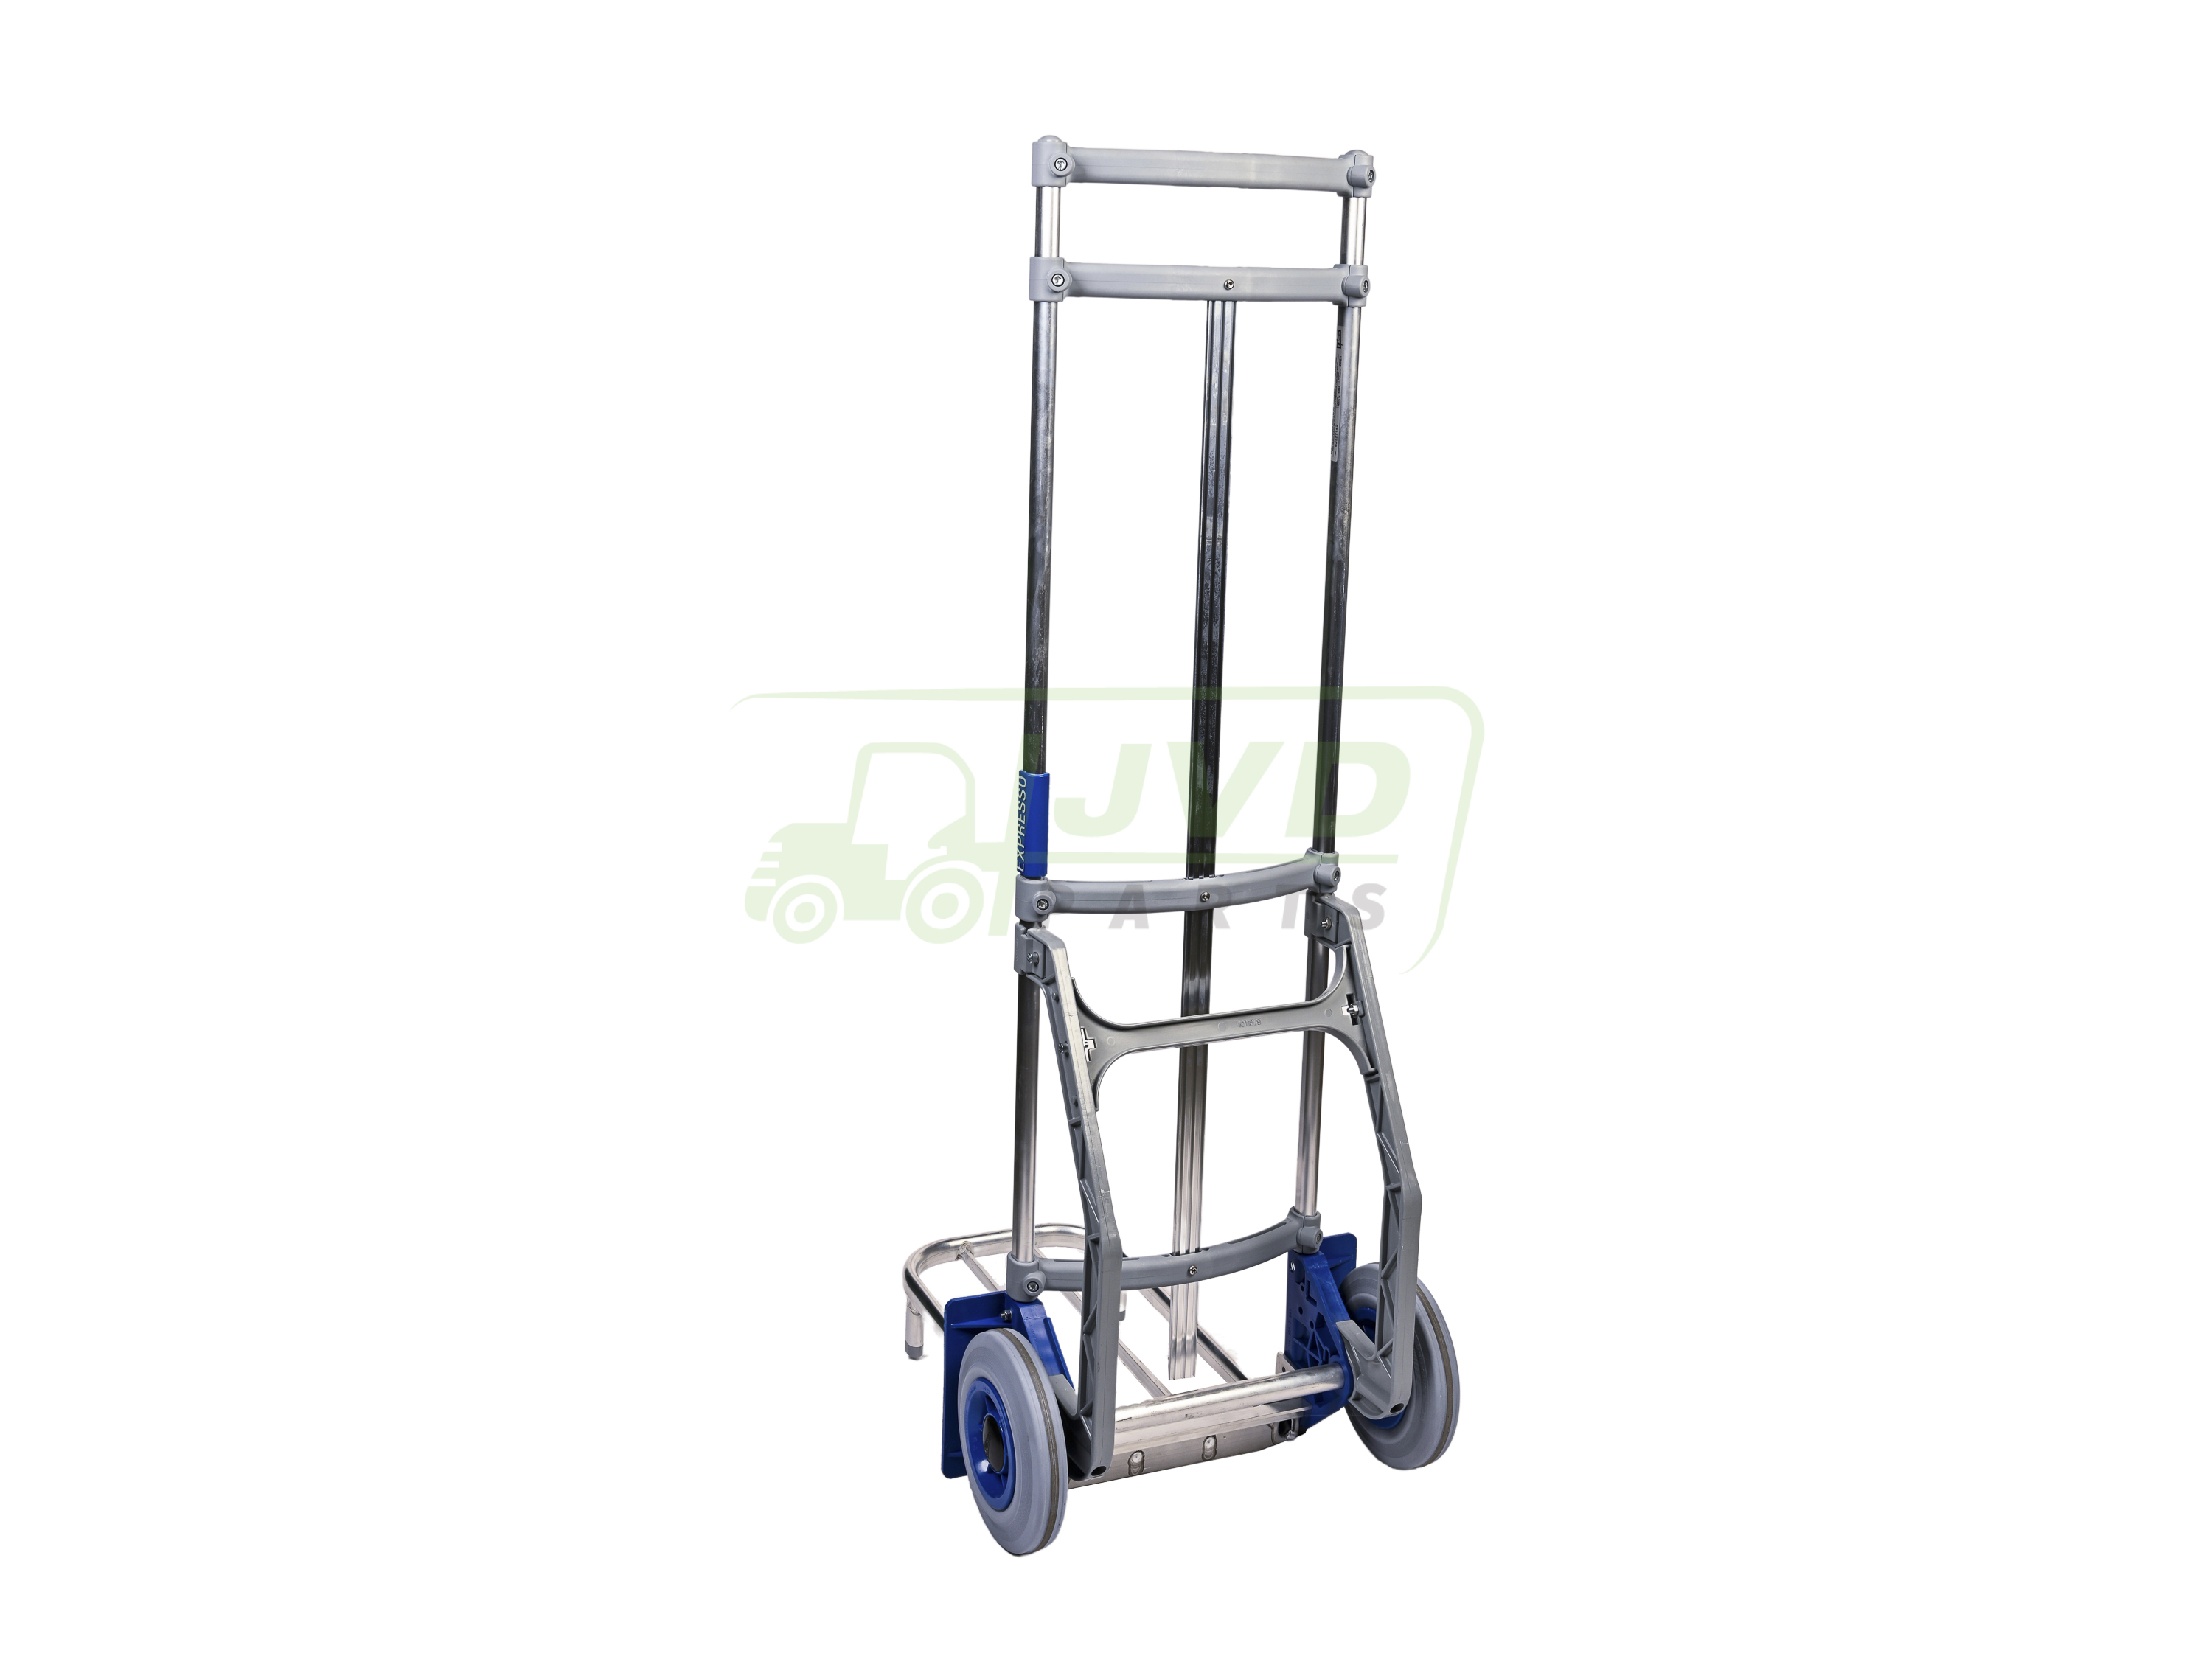 Expresso Aluminium Handtrolley, Height 1300mm - Foldable Plate